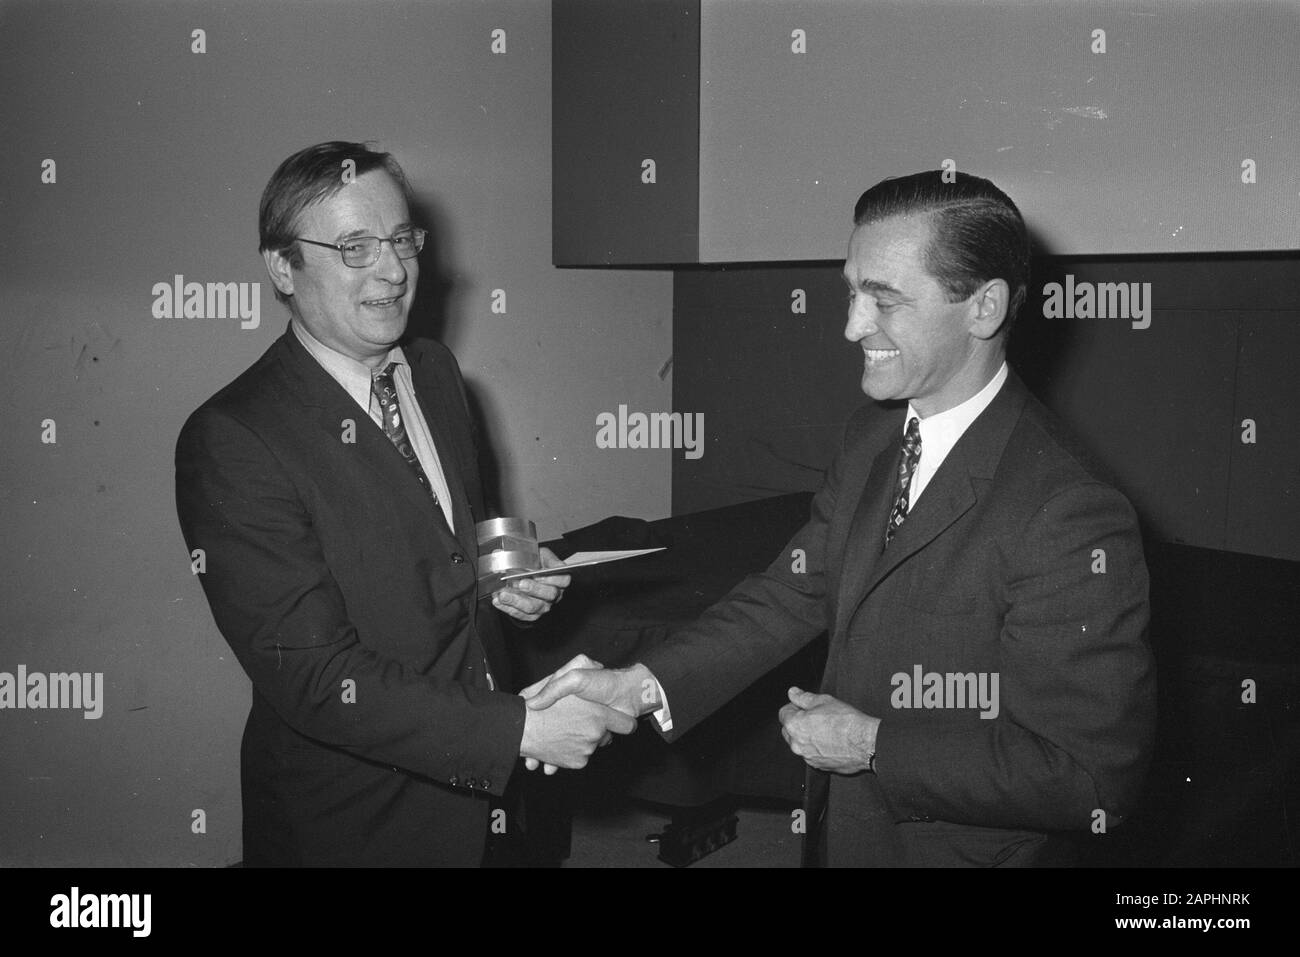 The Minister of Science, Jhr. mr. M. L. de Brauw awards the State Prize for Fine Arts and Architecture 1971 to Co Westerik (painter, graphic artist) in Date: September 24, 1971 Keywords: graphic artists, museums, prizes, painters Personal name: Brauw, M.L. de, Westerik, Co. Stock Photo